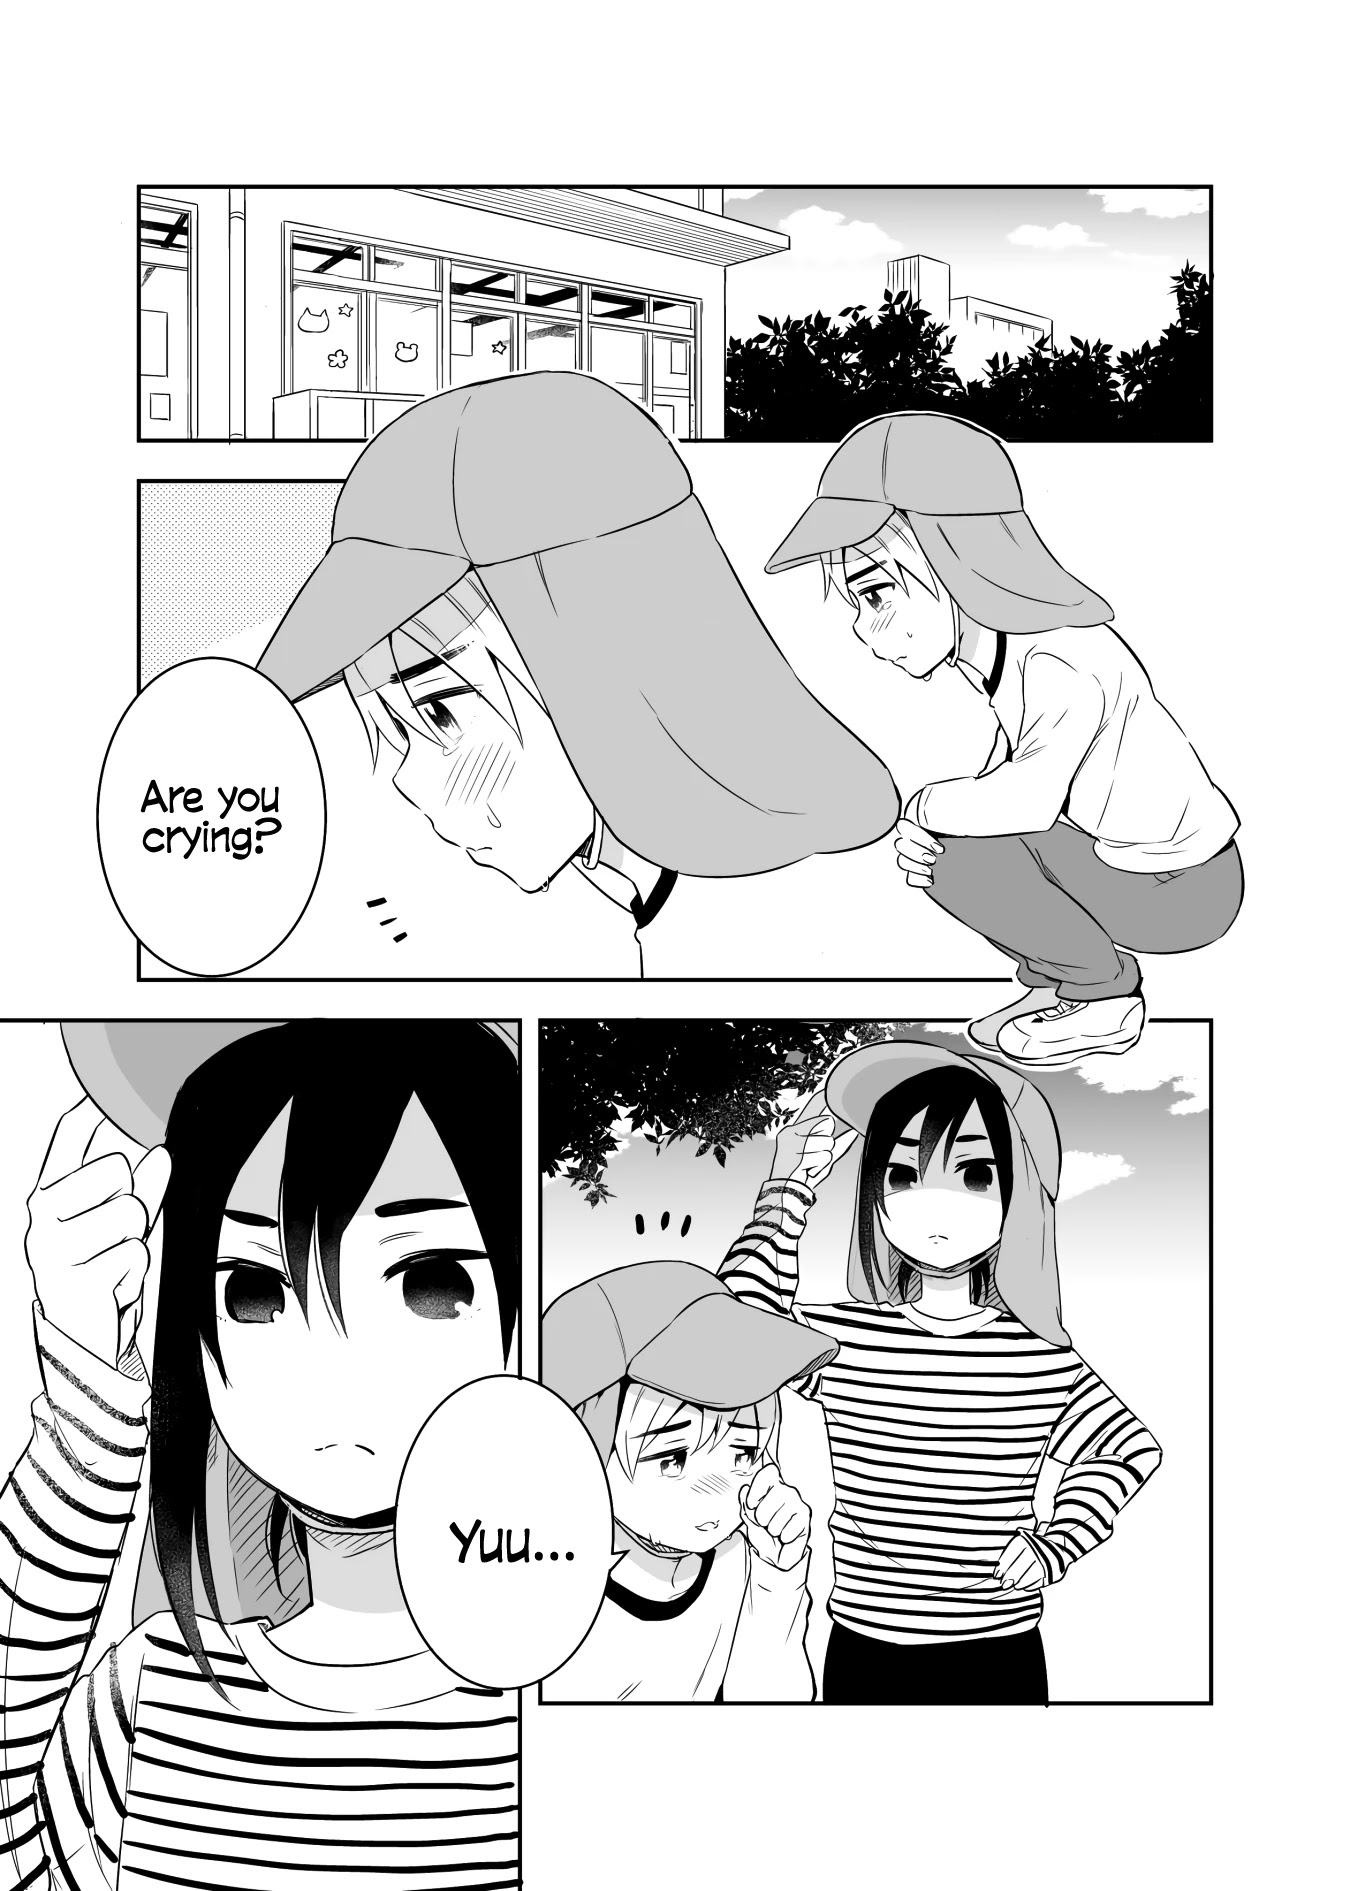 The Story Of My Husband's Cute Crossdressing - Page 1